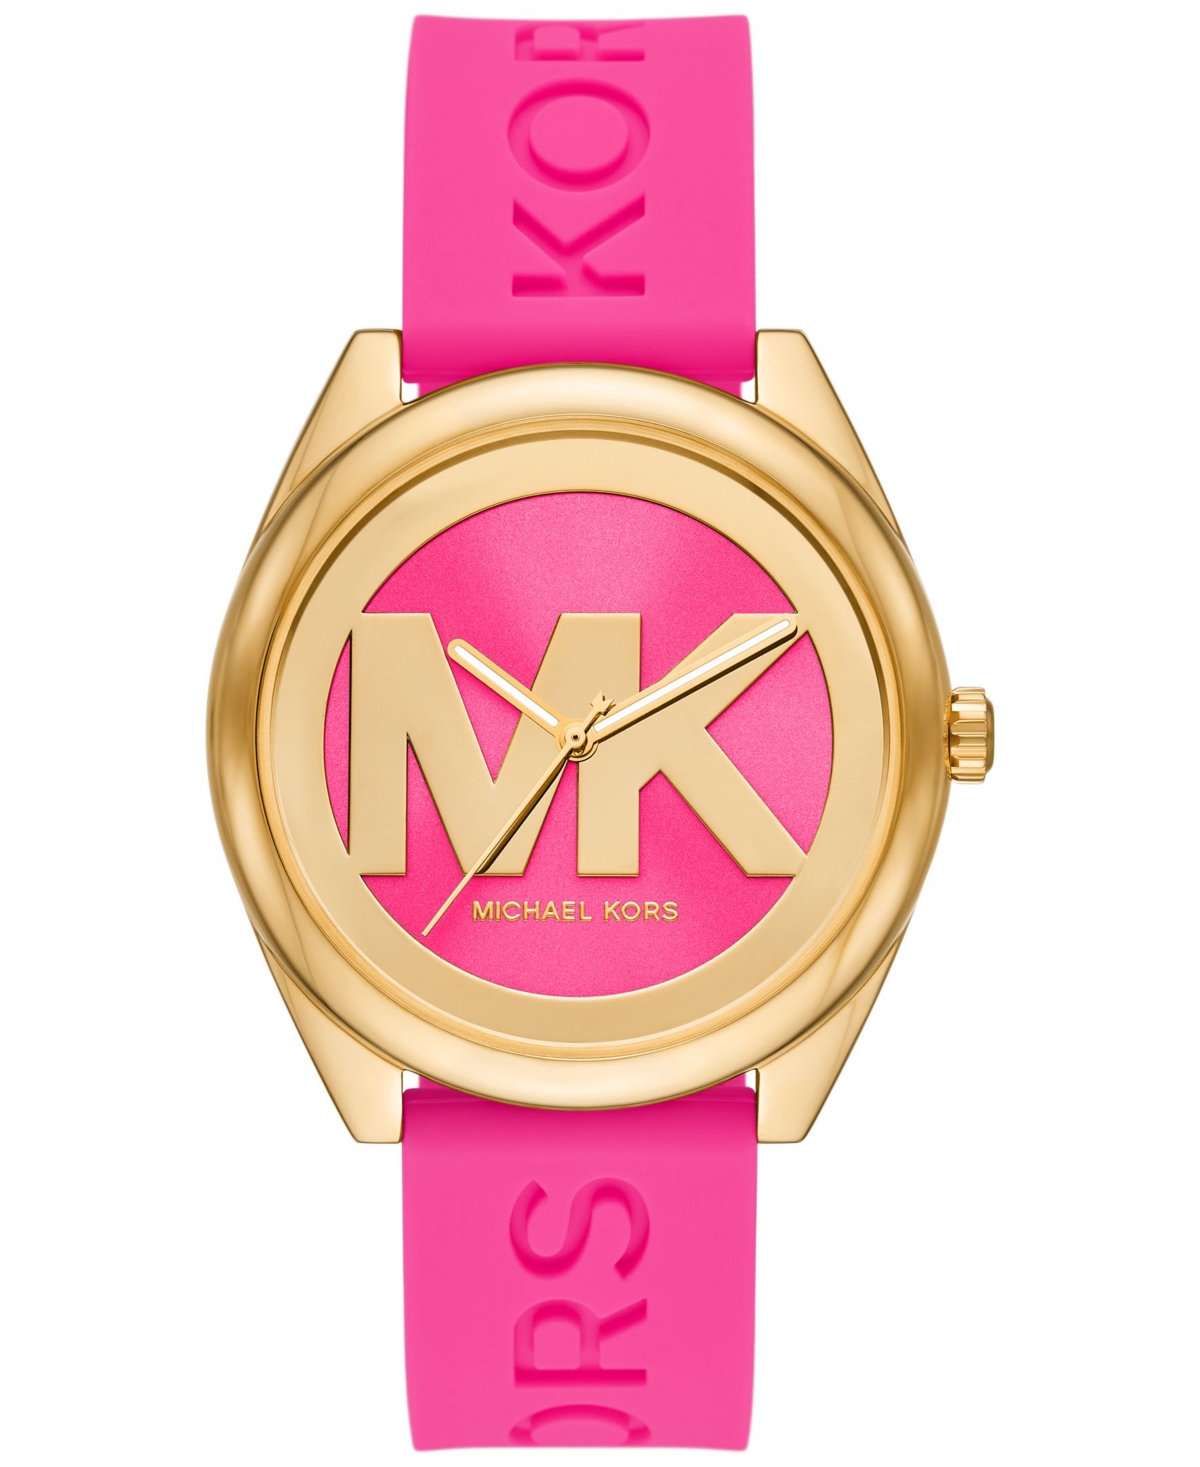 Michael Kors Women's Janelle Three-hand Pink Silicone Watch 42mm